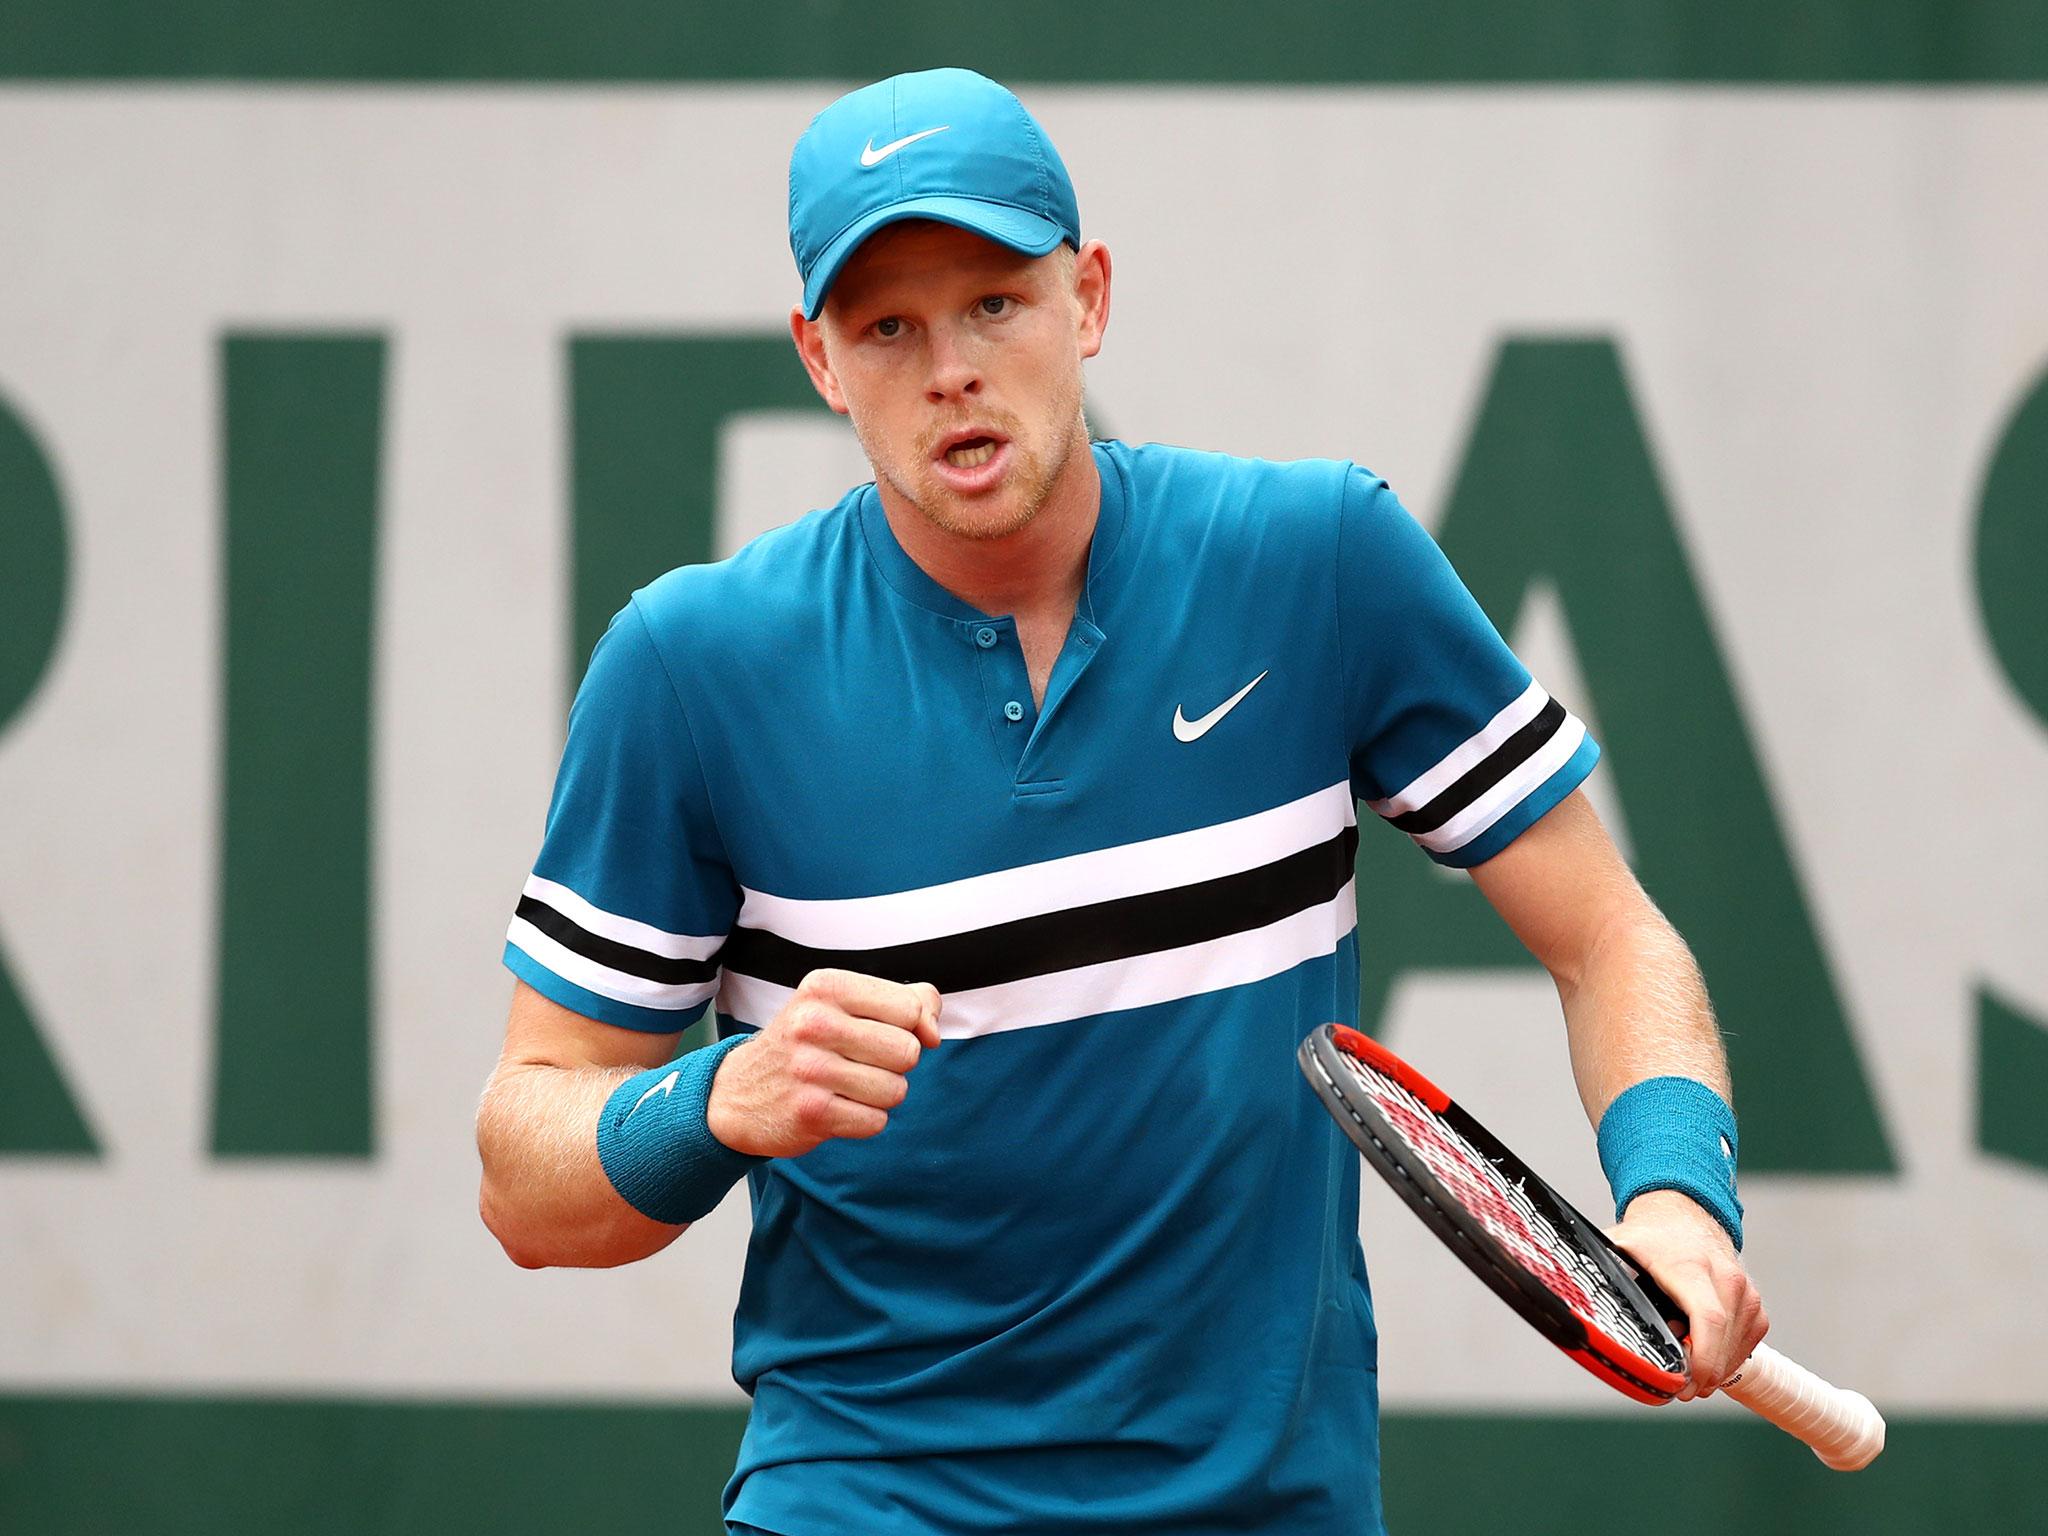 French Open 2018: Kyle Edmund through to second round after win over ...